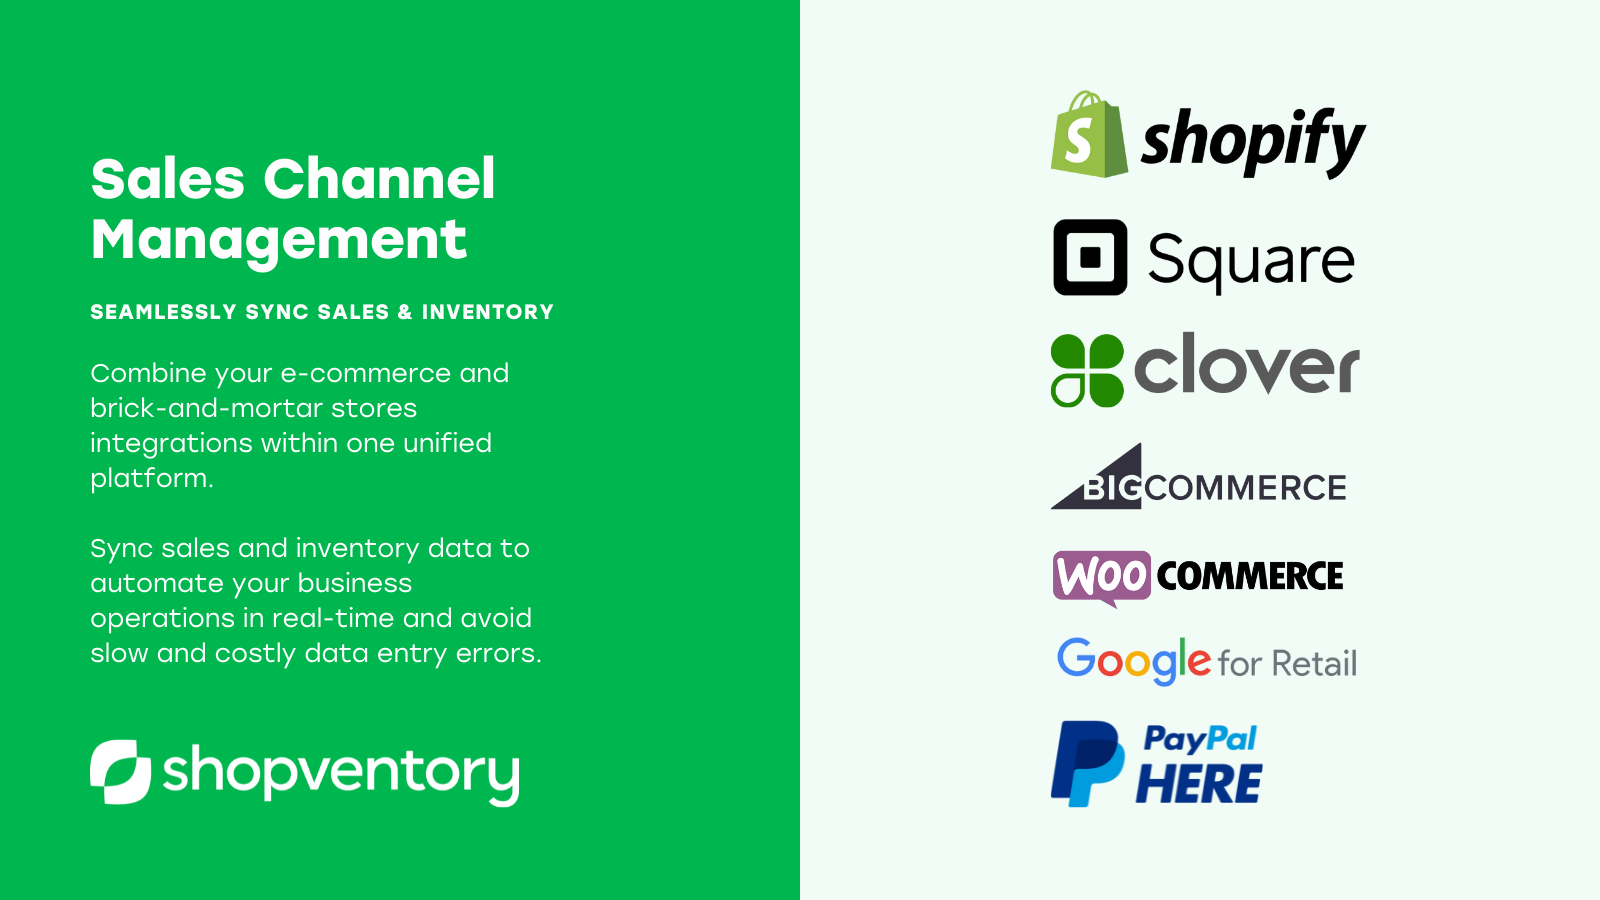 Clover Pos Shopify: Unifying Sales and Simplifying Inventory Management